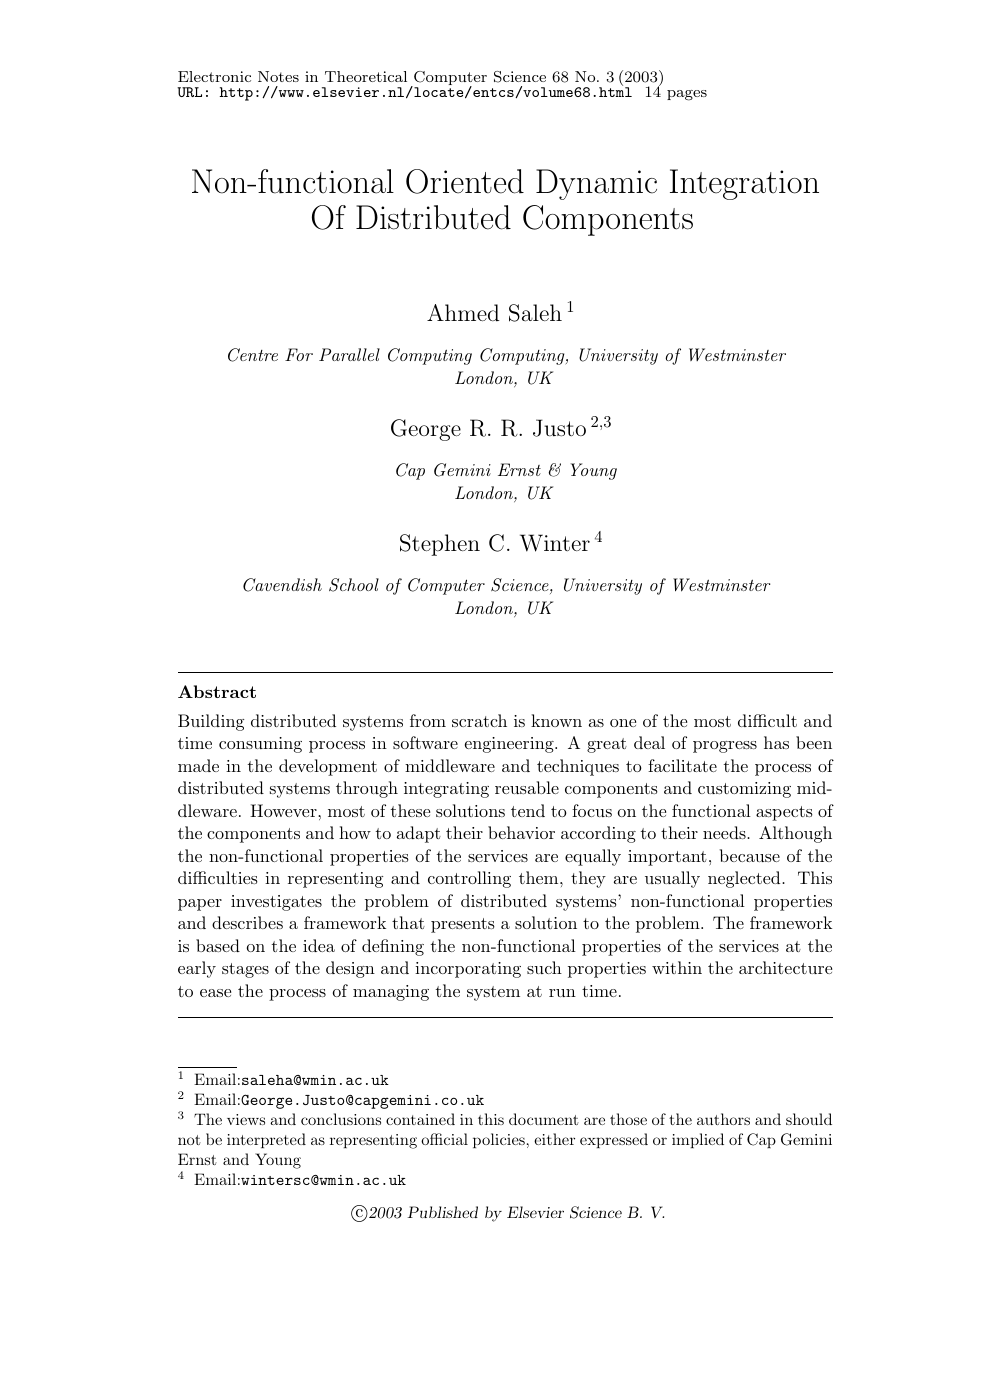 Non Functional Oriented Dynamic Integration Of Distributed Components Topic Of Research Paper In Computer And Information Sciences Download Scholarly Article Pdf And Read For Free On Cyberleninka Open Science Hub